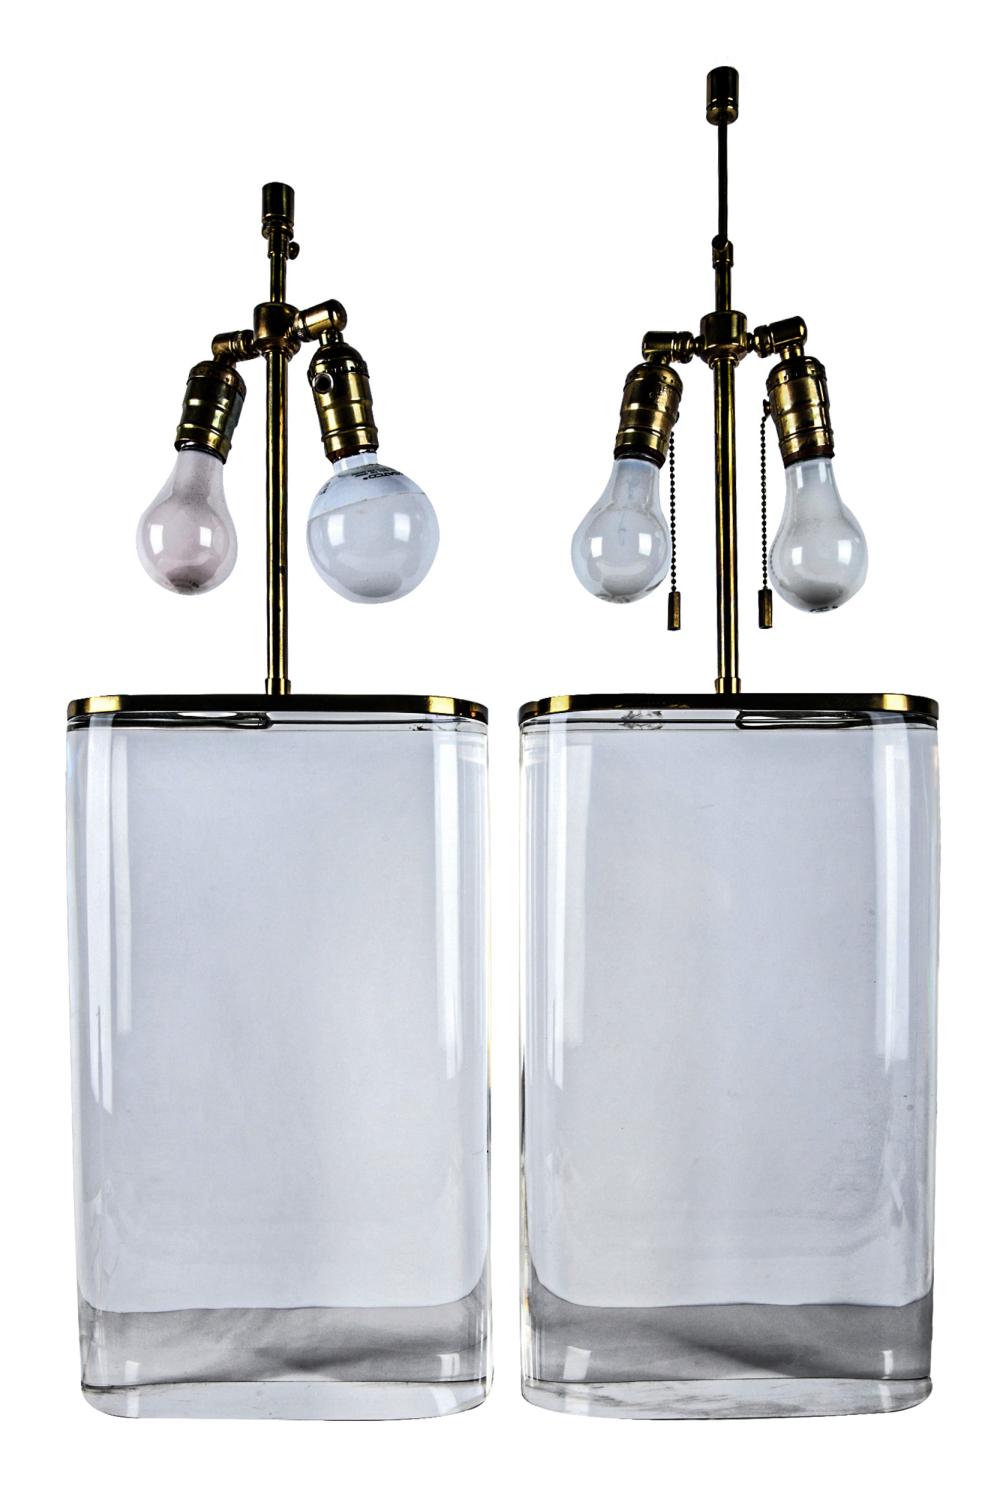 PAIR OF BRASS & ACRYLIC TABLE LAMPSCondition: